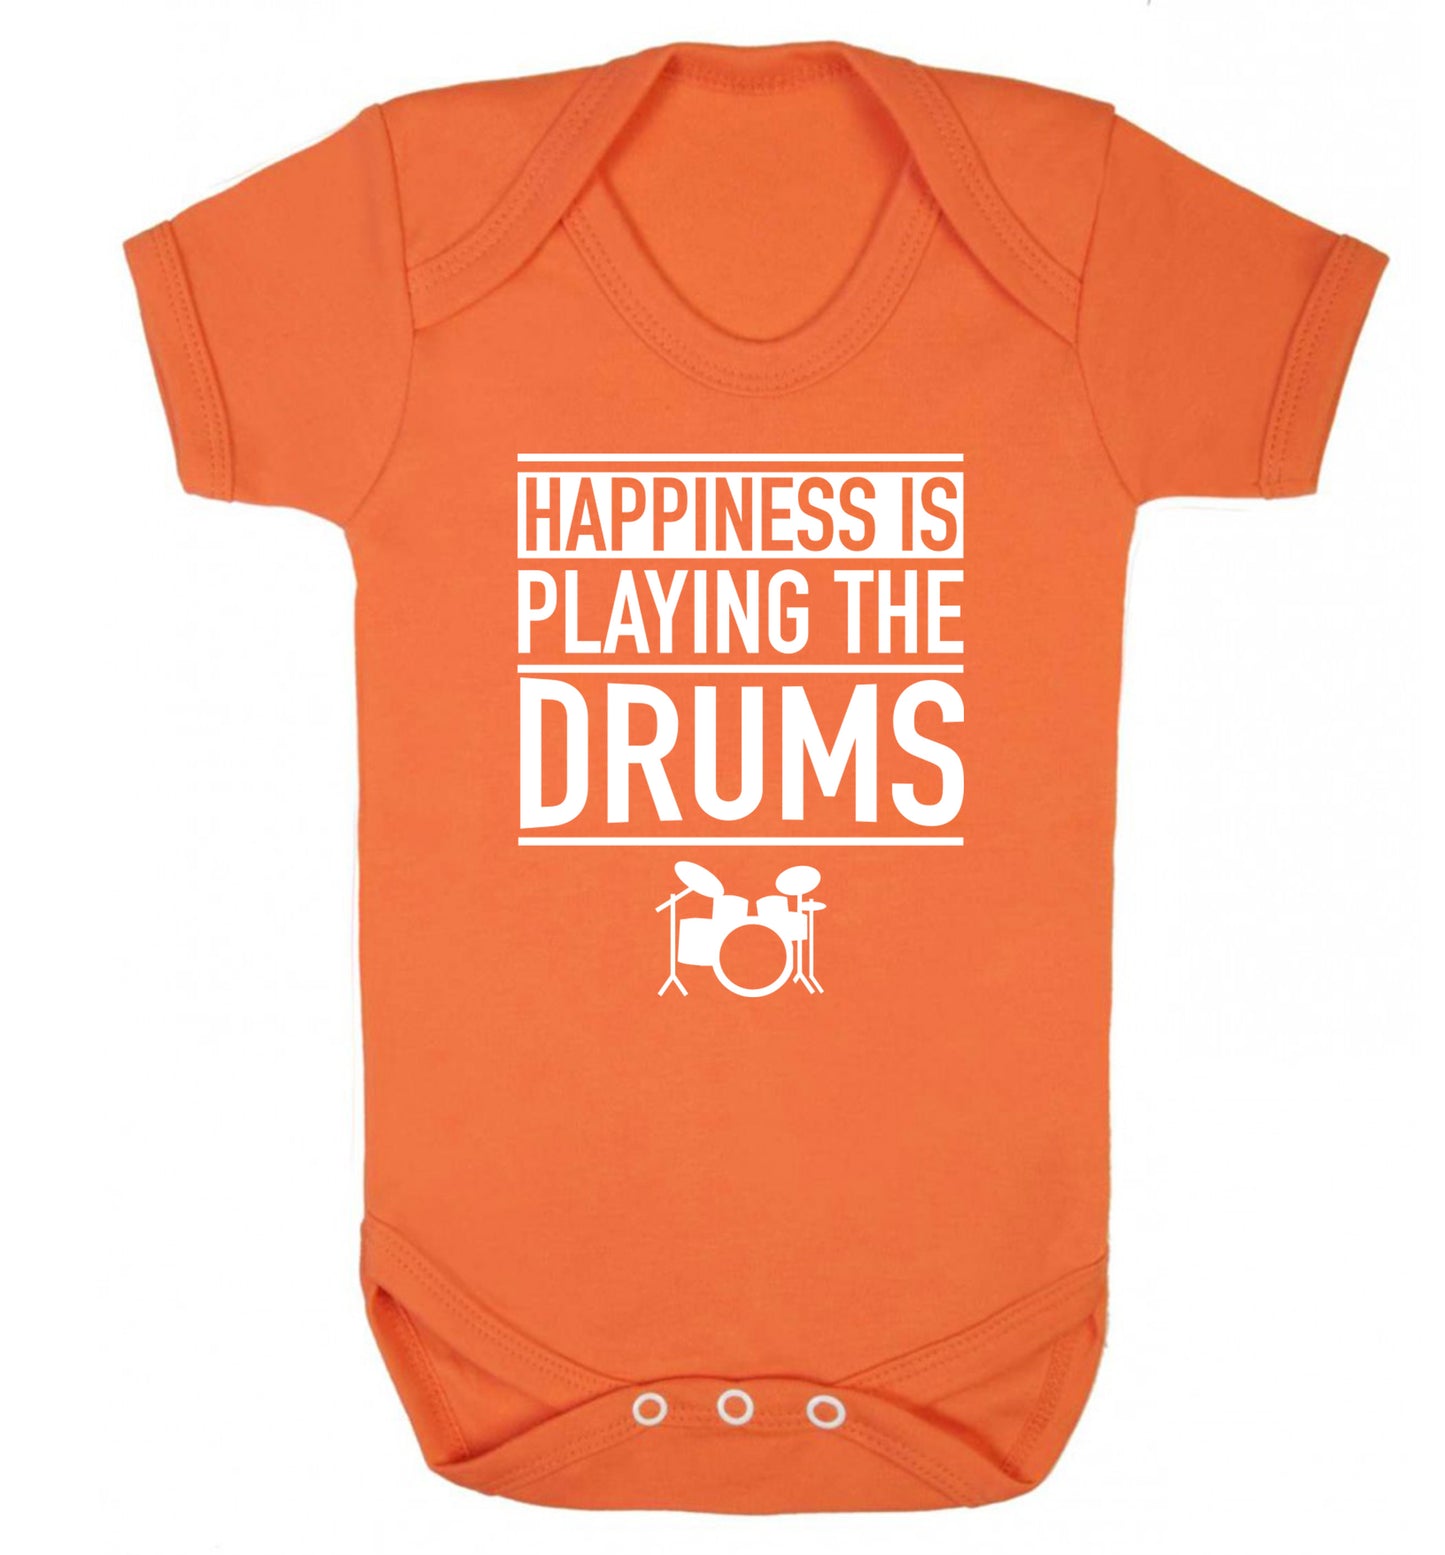 Happiness is playing the drums Baby Vest orange 18-24 months